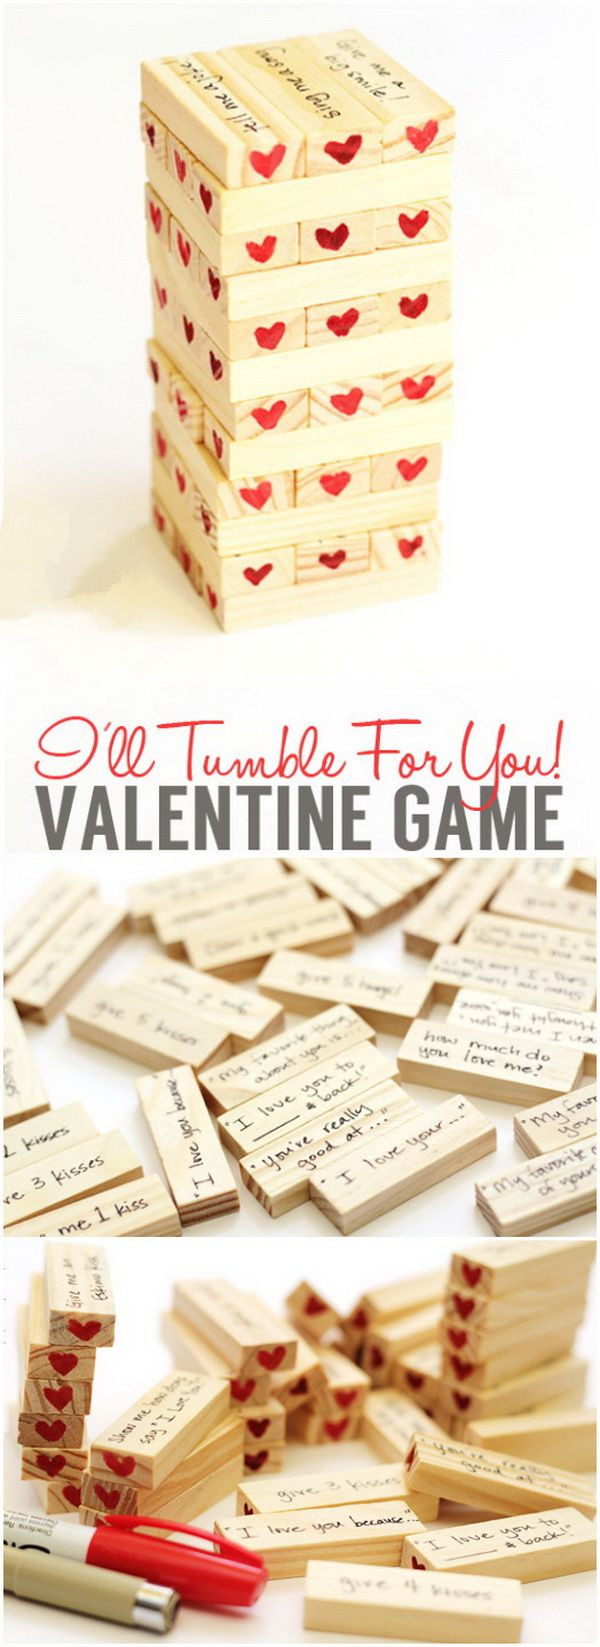 Valentine Homemade Gift Ideas For Boyfriend
 Valentine’s Day Hearty Tumble Game Another fun t idea